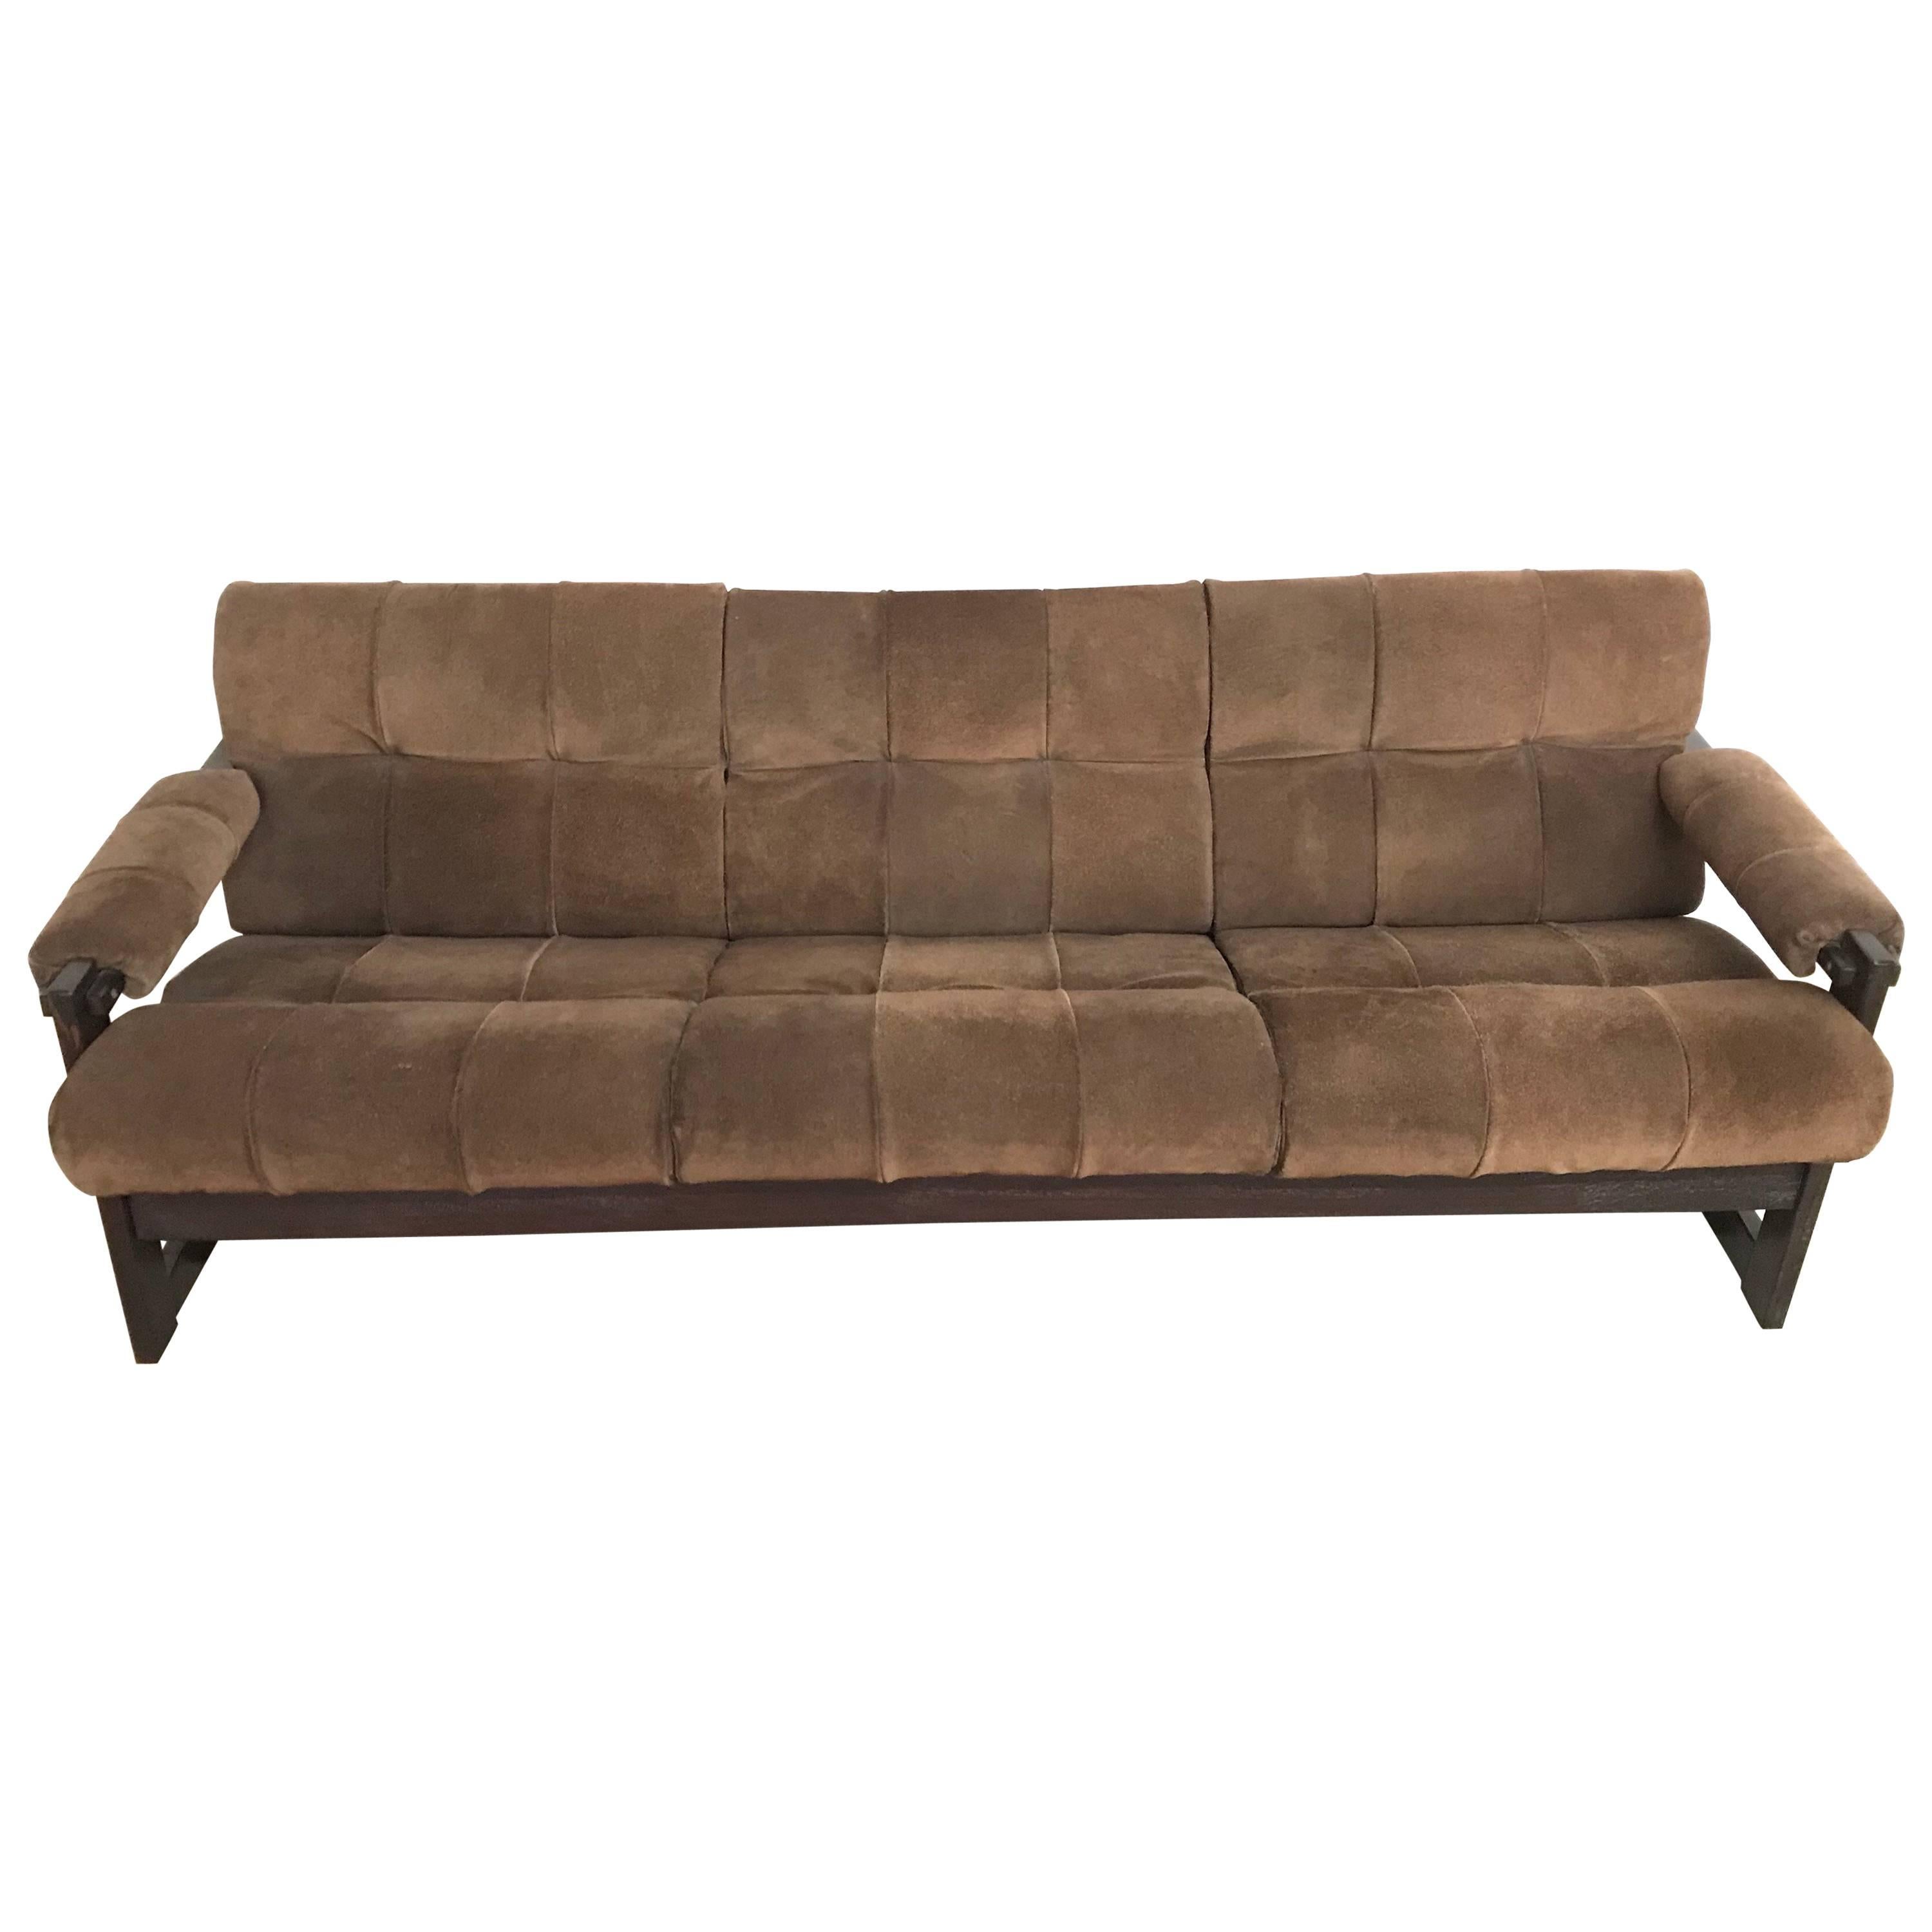 Perceval Lafer Brazilian Rosewood and Suede Sofa